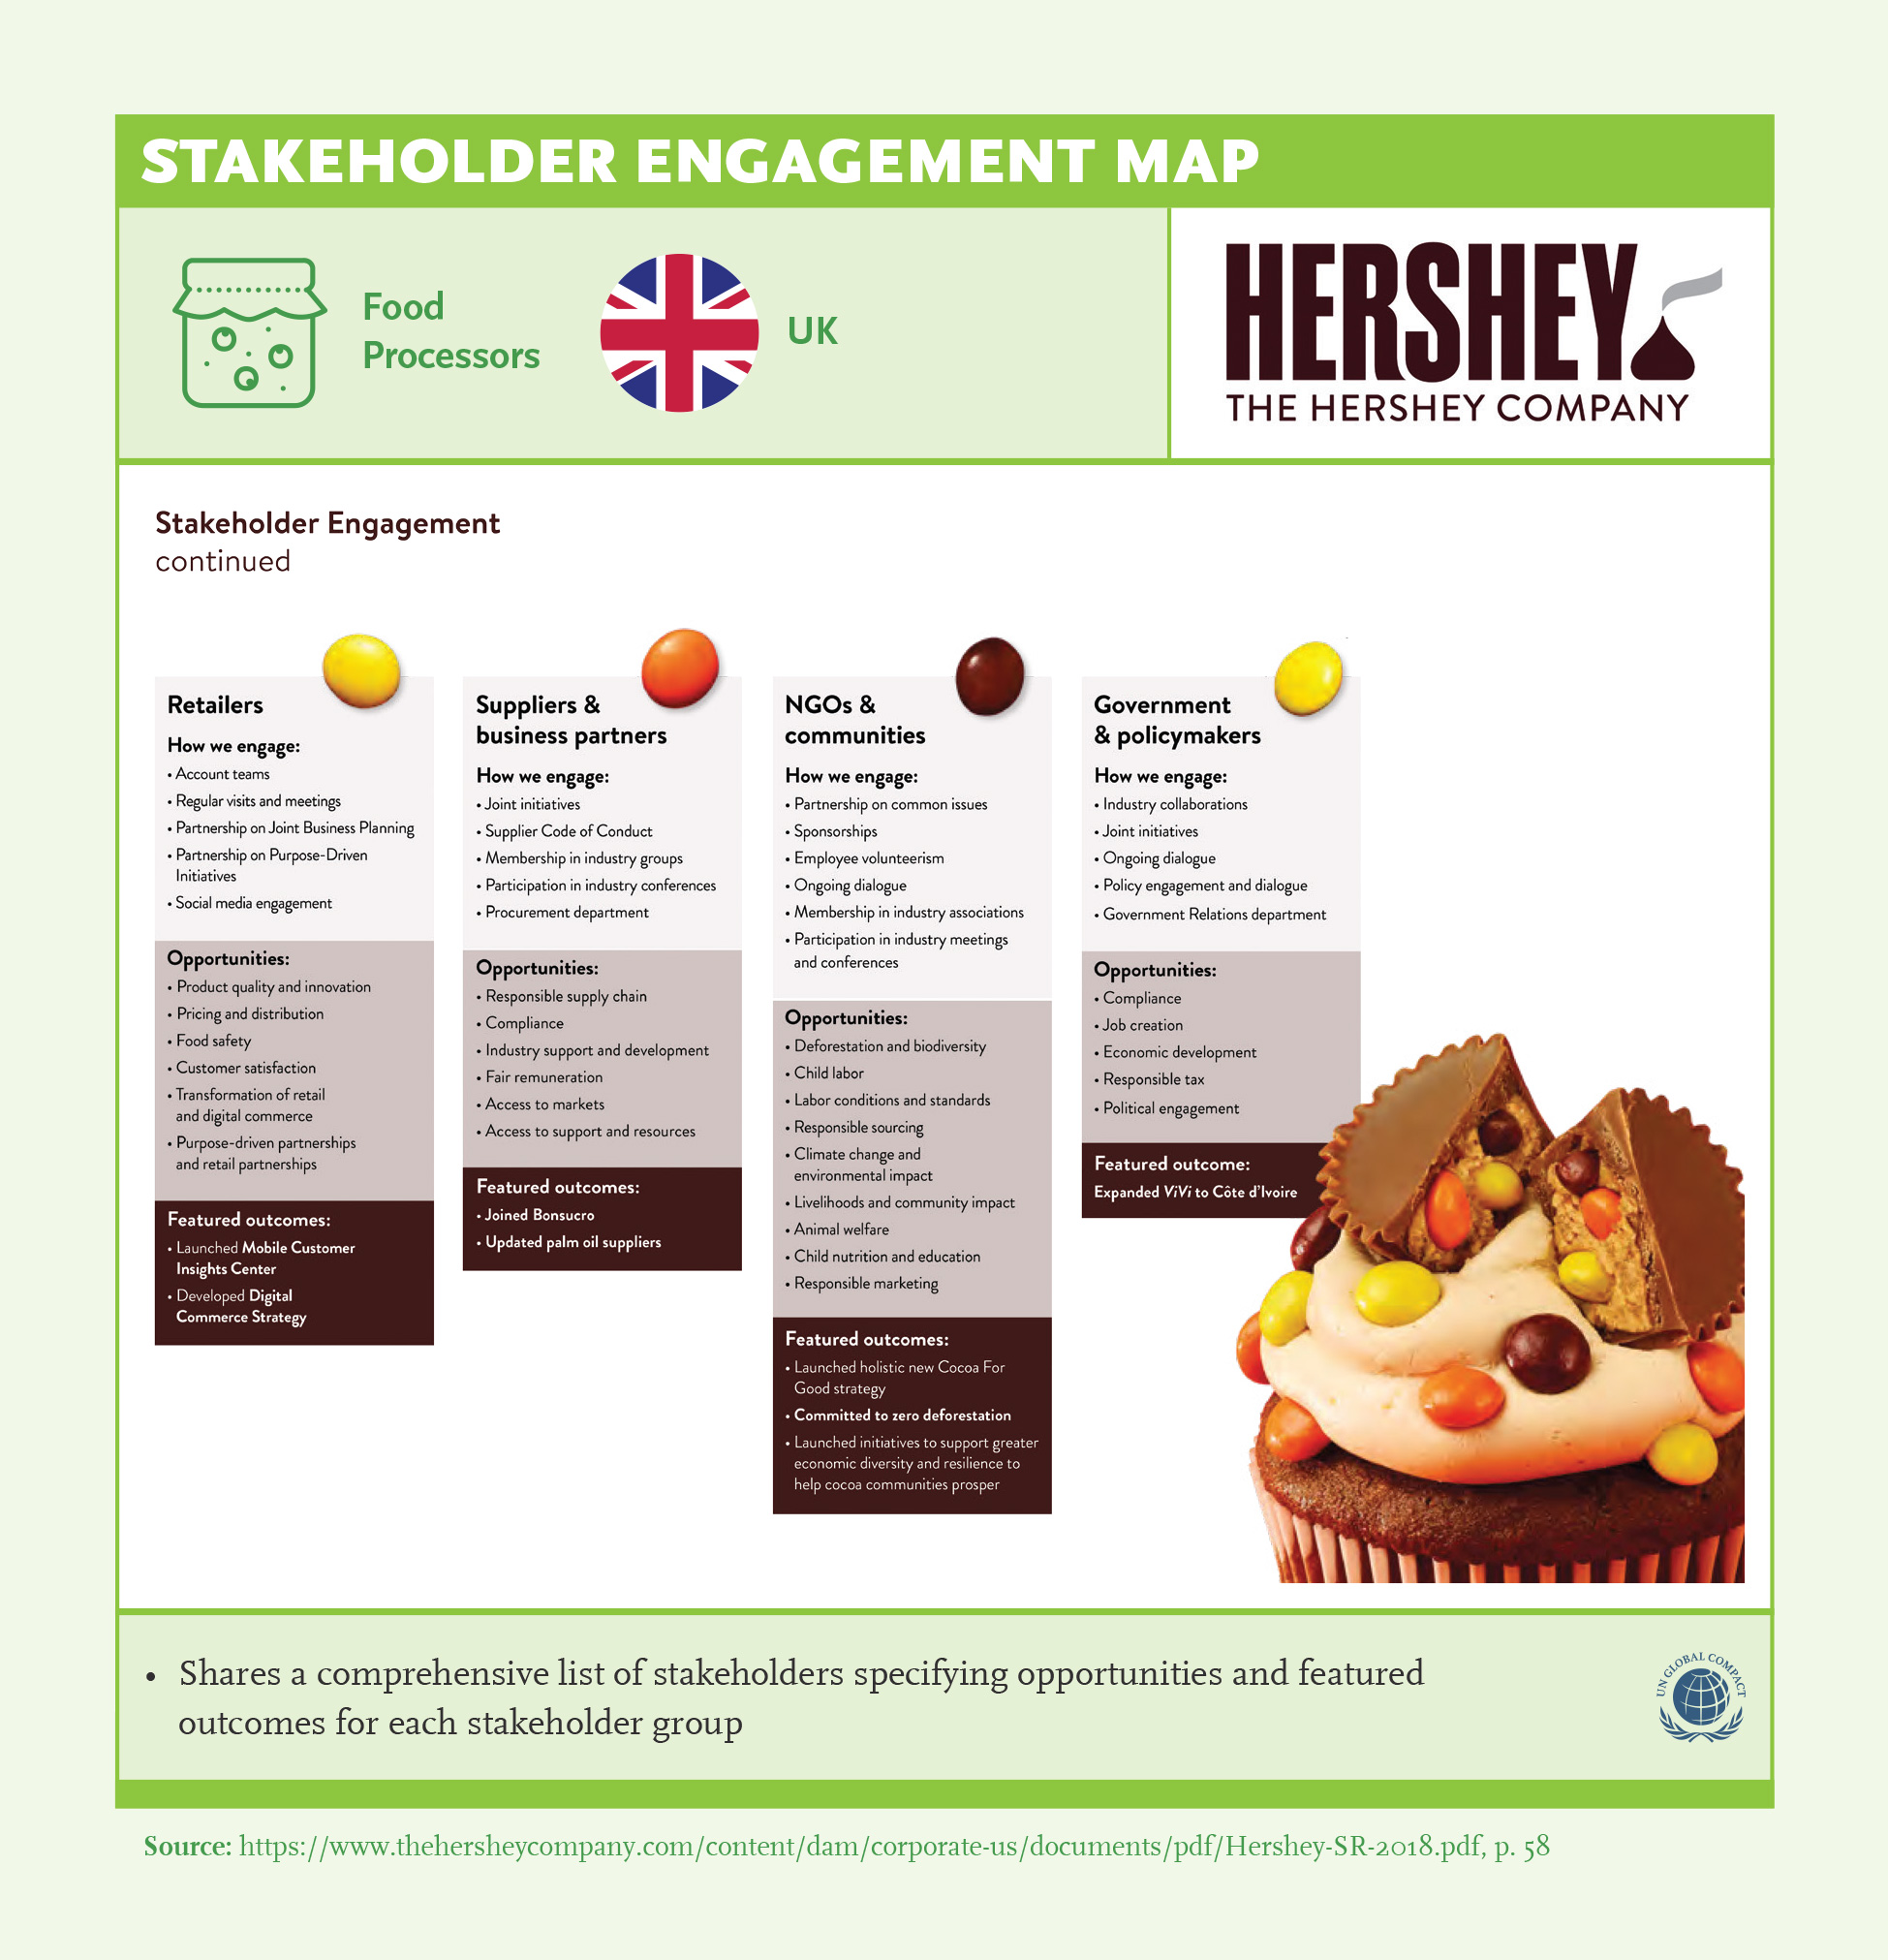 Stakeholder Engagement Map: Hershey’s